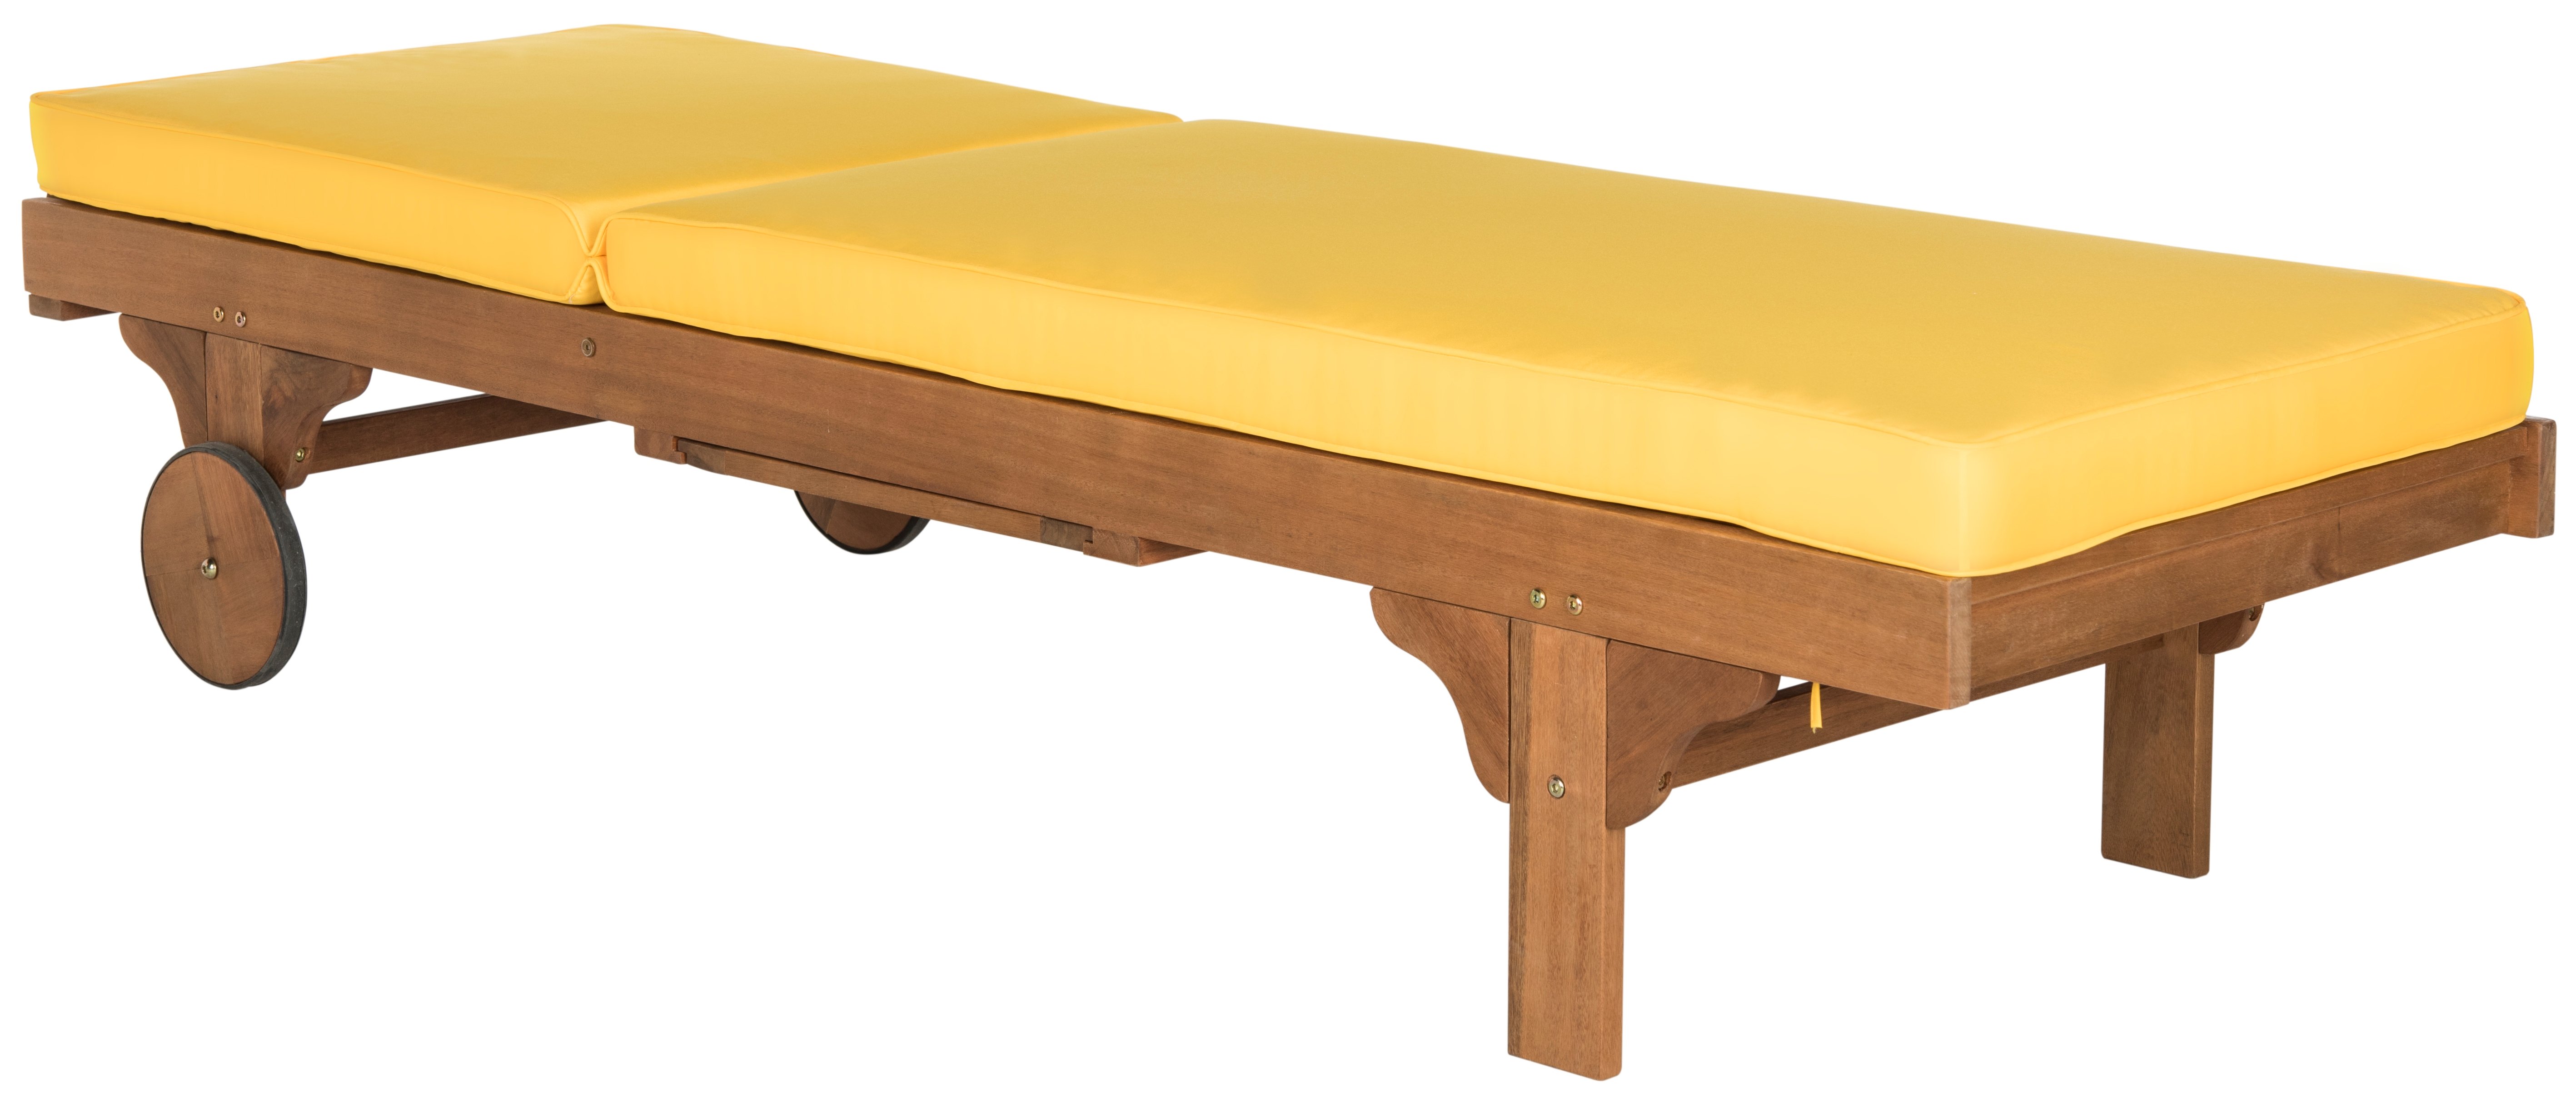 Newport Chaise Lounge Chair With Side Table - Natural/Yellow - Arlo Home - Image 3